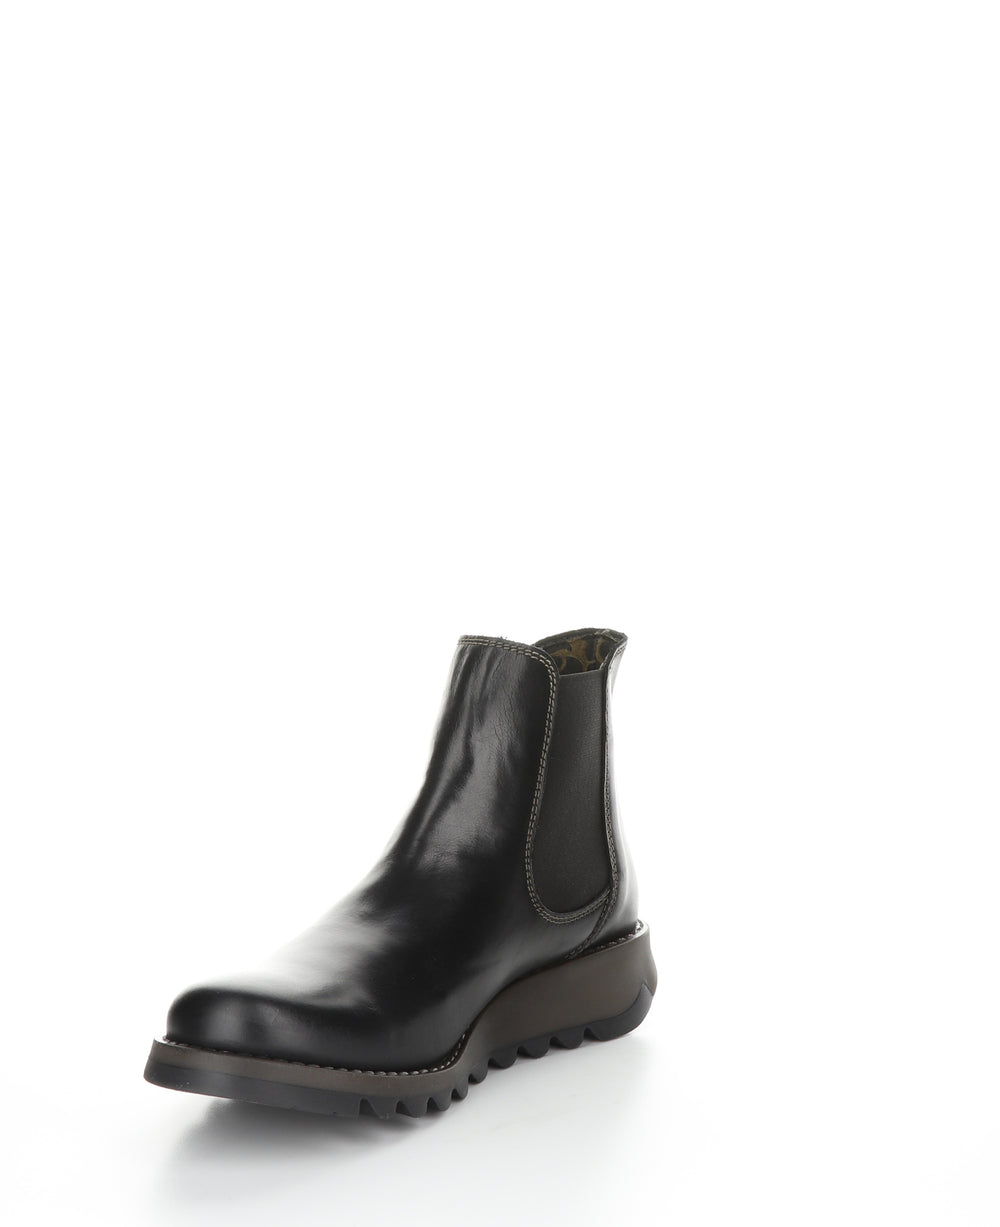 SALV Black Round Toe Ankle Boots|SALV Bottines à Bout Rond in Noir